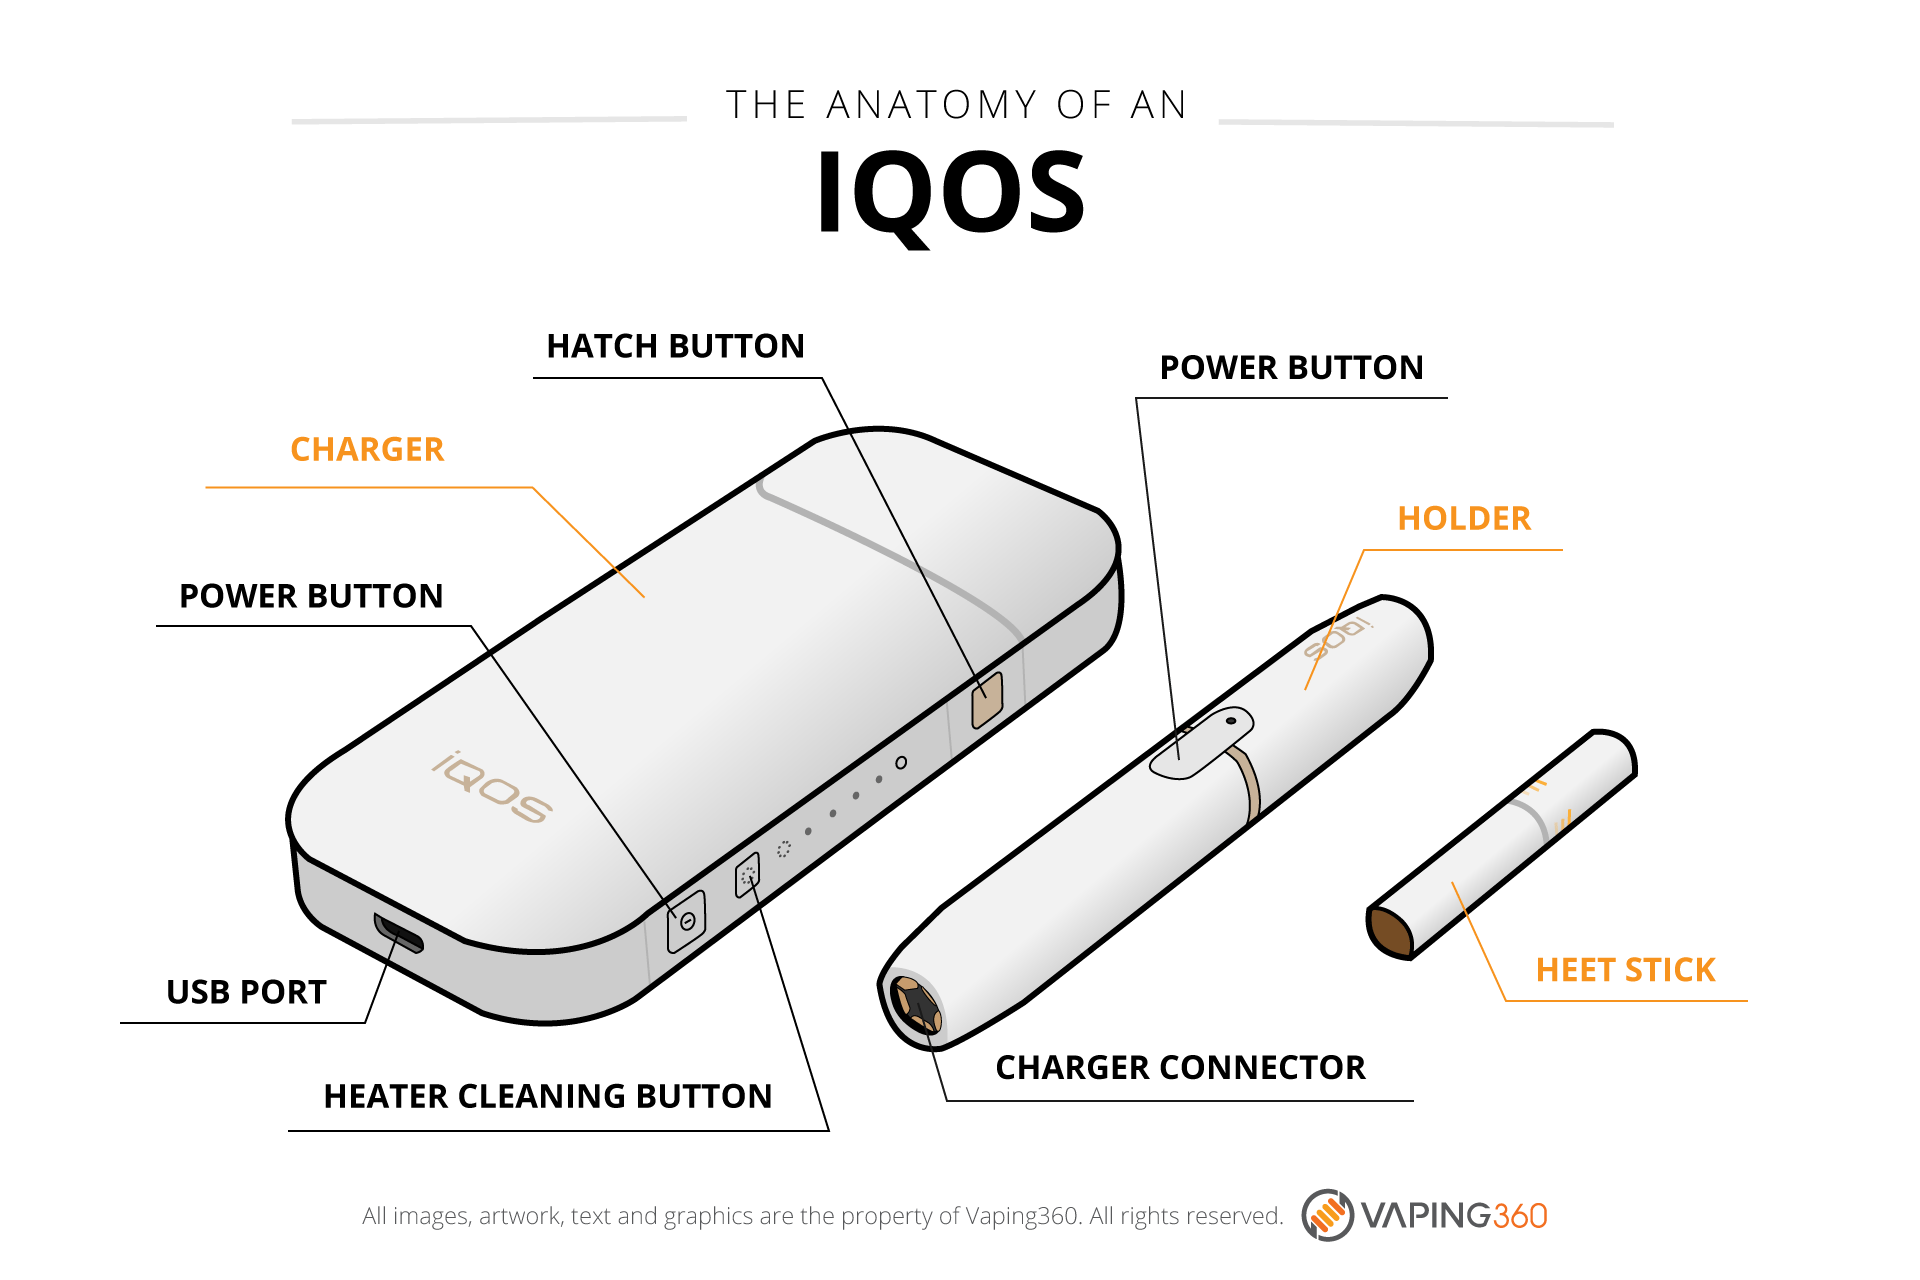 IQOS: How Does It Work and Where Can You Find One? - Vaping360